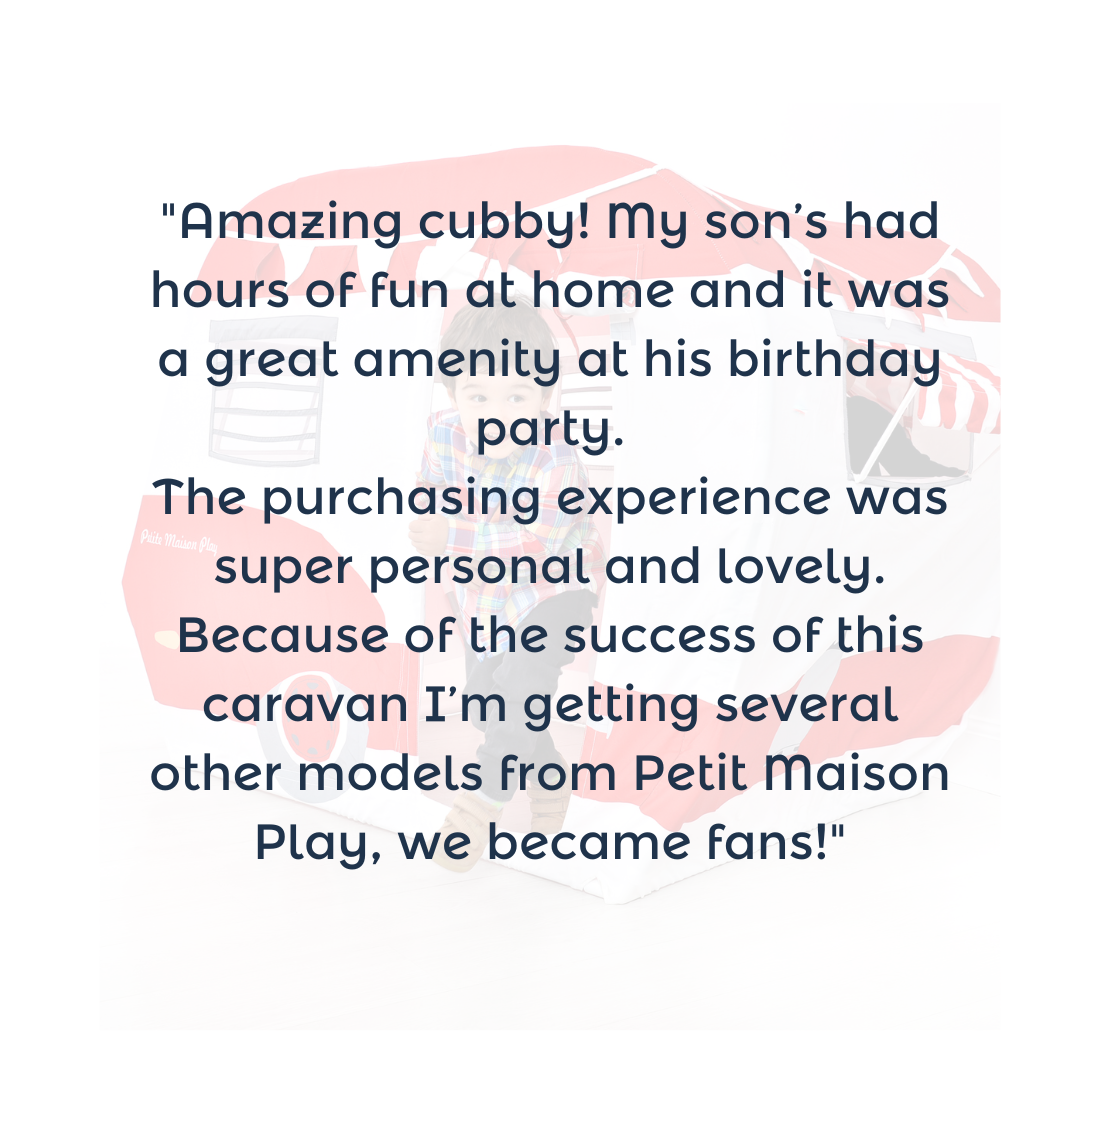 "Amazing cubby! My son’s had hours of fun at home and it was a great amenity at his birthday party. The purchasing experience was super personal and lovely. Because of the success of this caravan I’m getting several other models from Petit Maison Play, we became fans!"